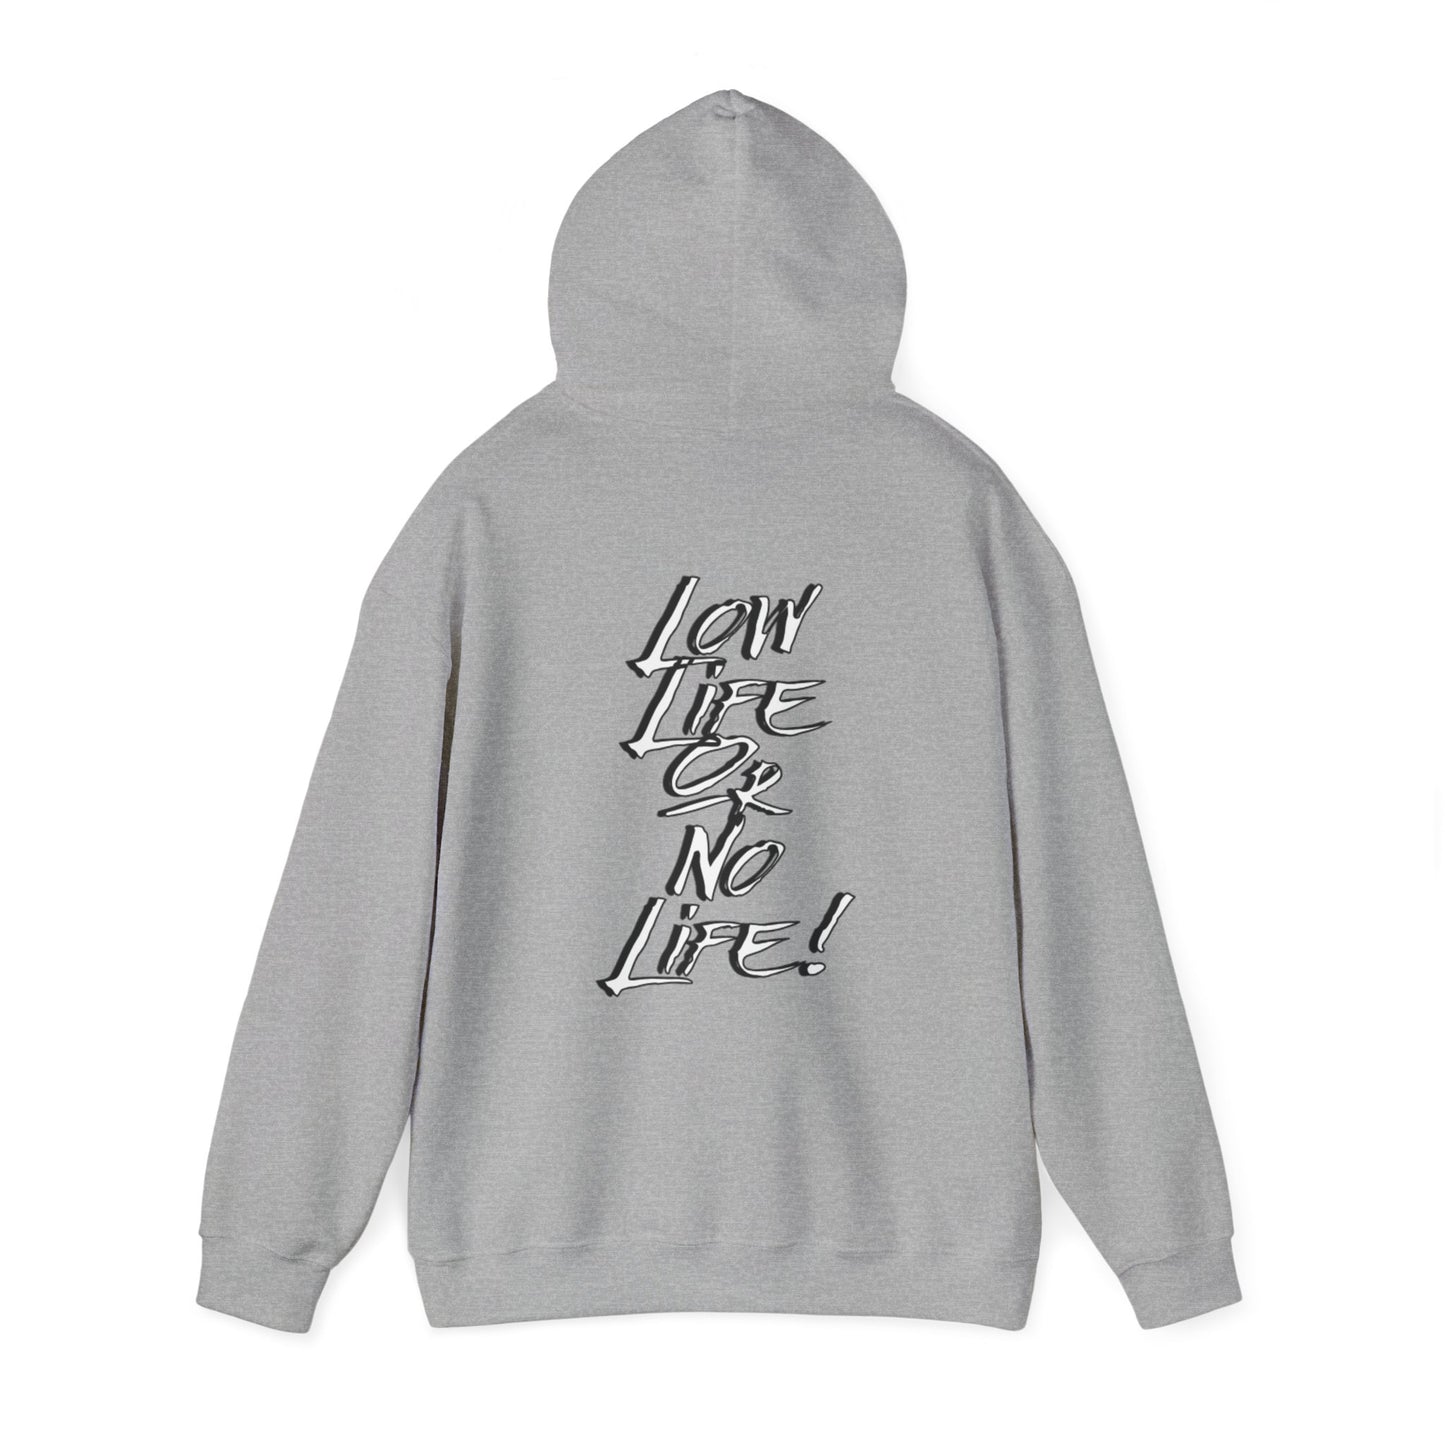 Low Life Or No Life Hoodie